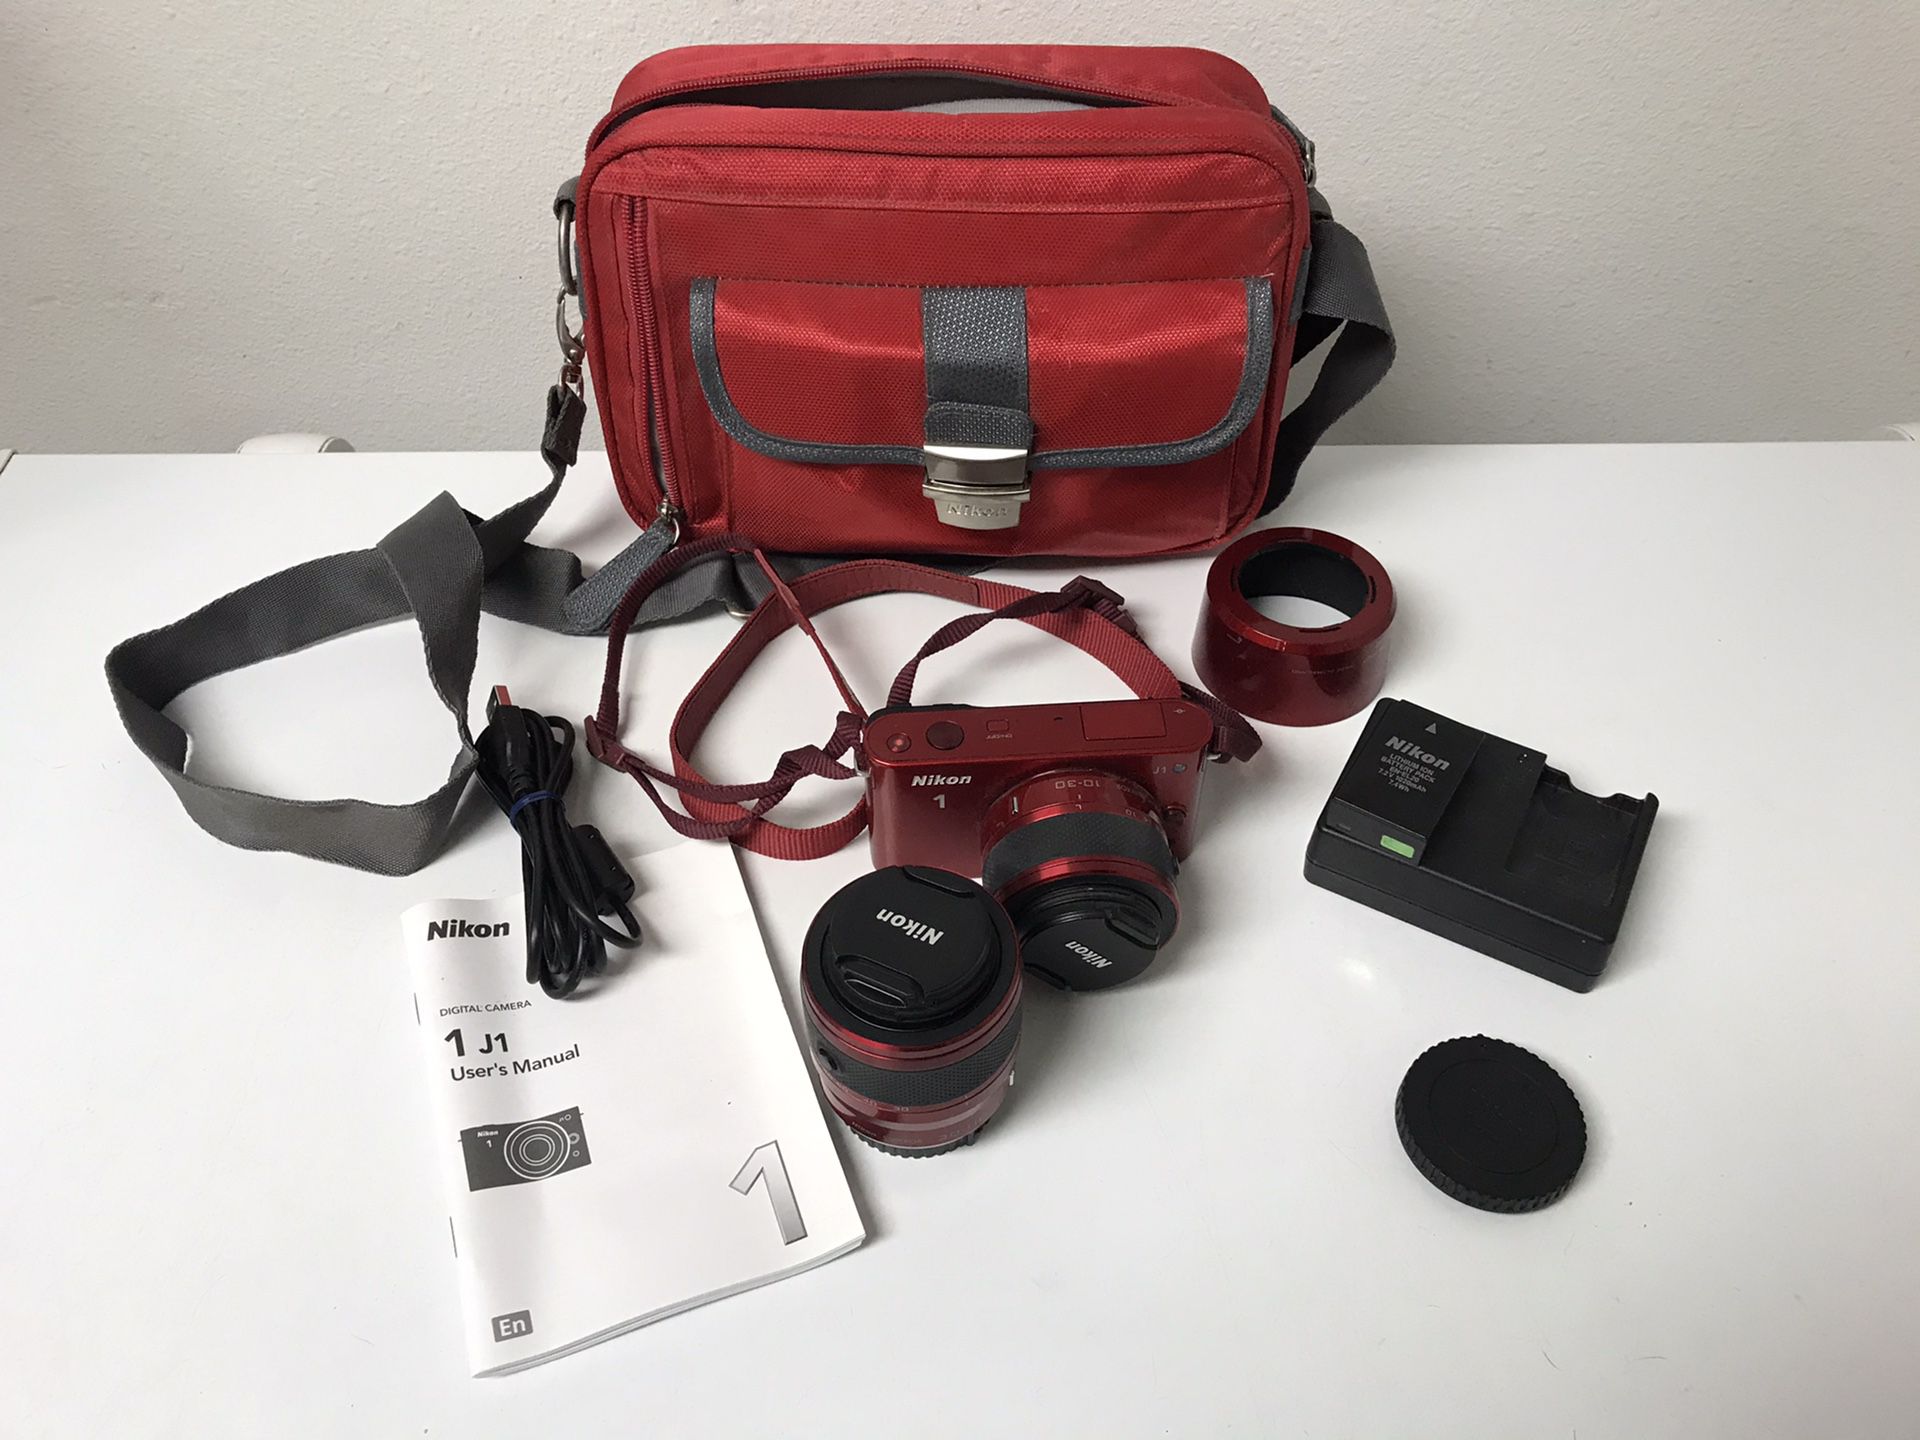 Nikon J1 camera complete w/ 2 interchangeable lenses(10-30mm & 30-110mm) lenses covers battery & charger, manual, usb cord, memory card, and Nikon ca